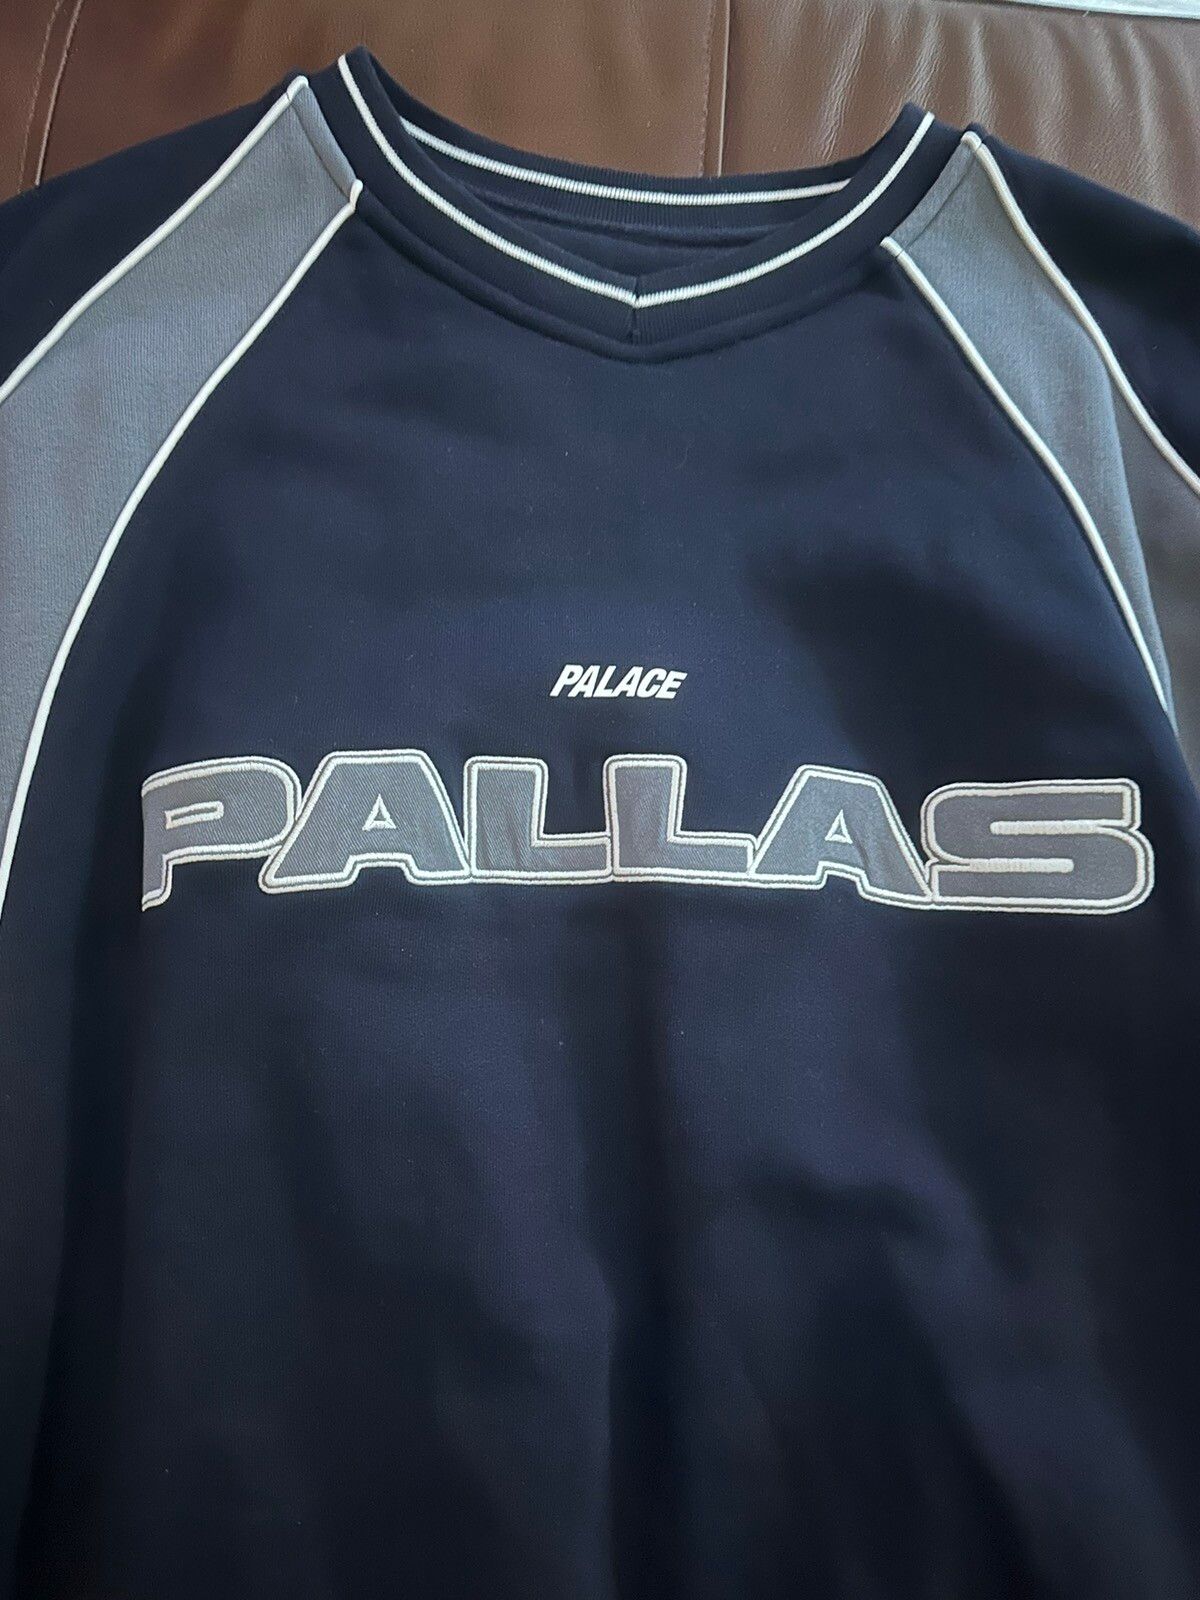 Palace Palace Pallas Panel Crew in Navy size Large | Grailed